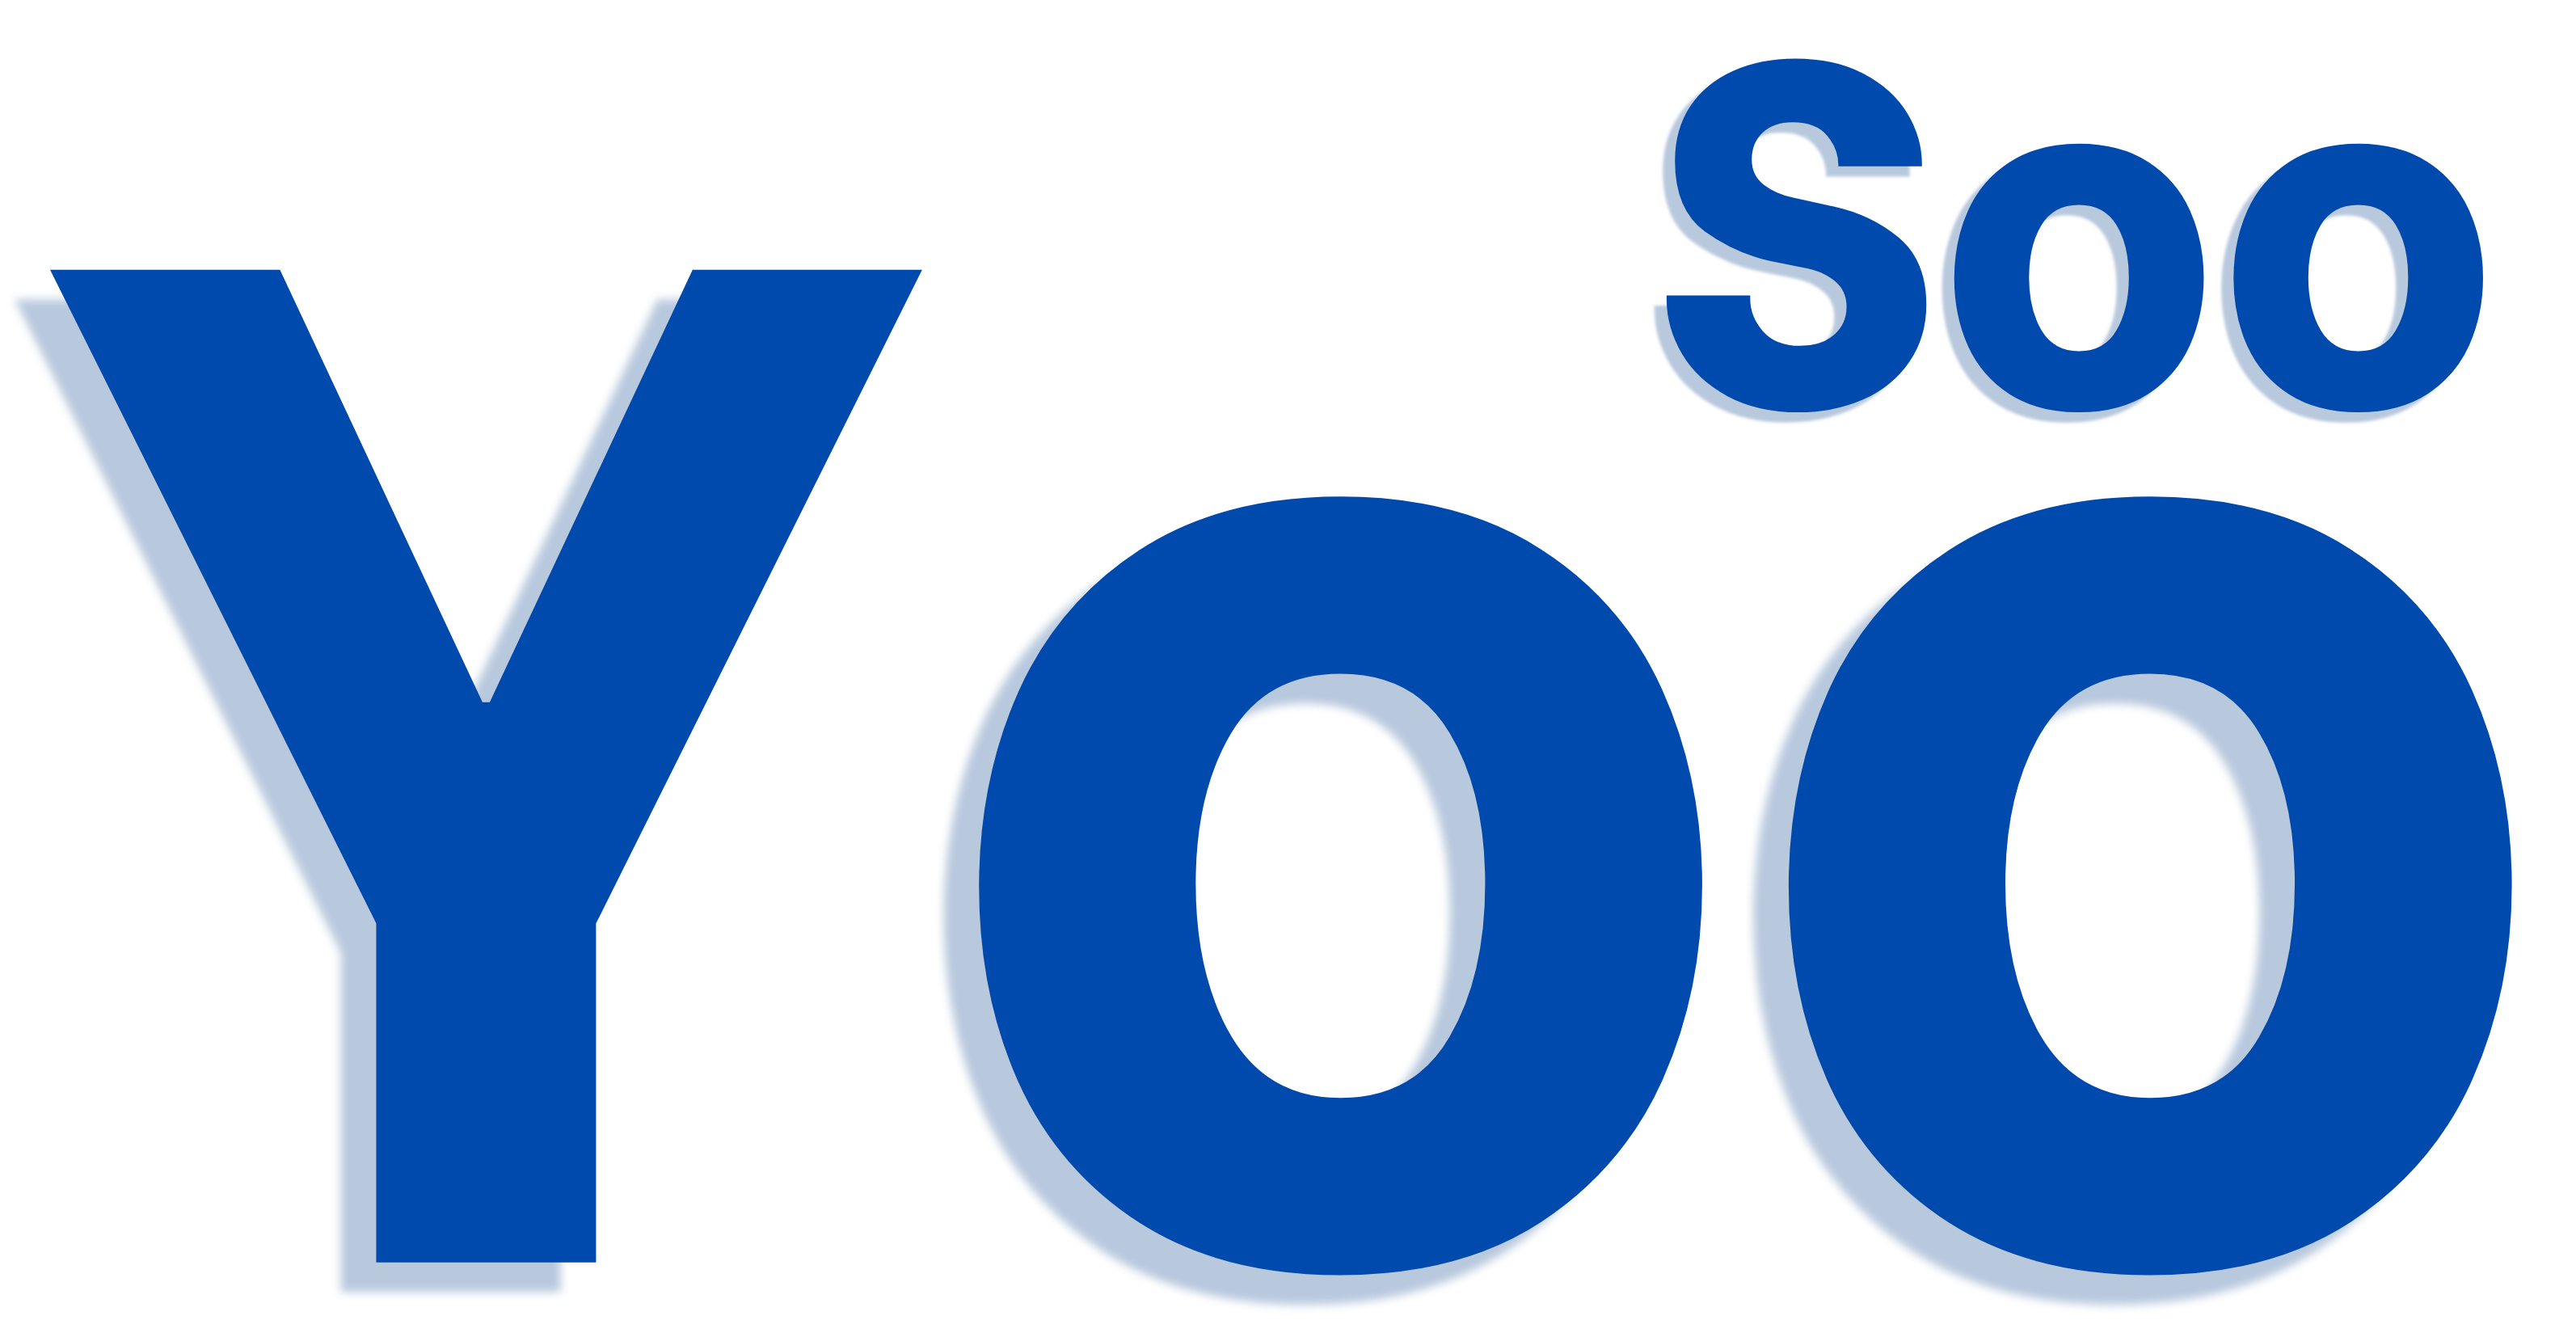 Soo Yoo for California State Assembly